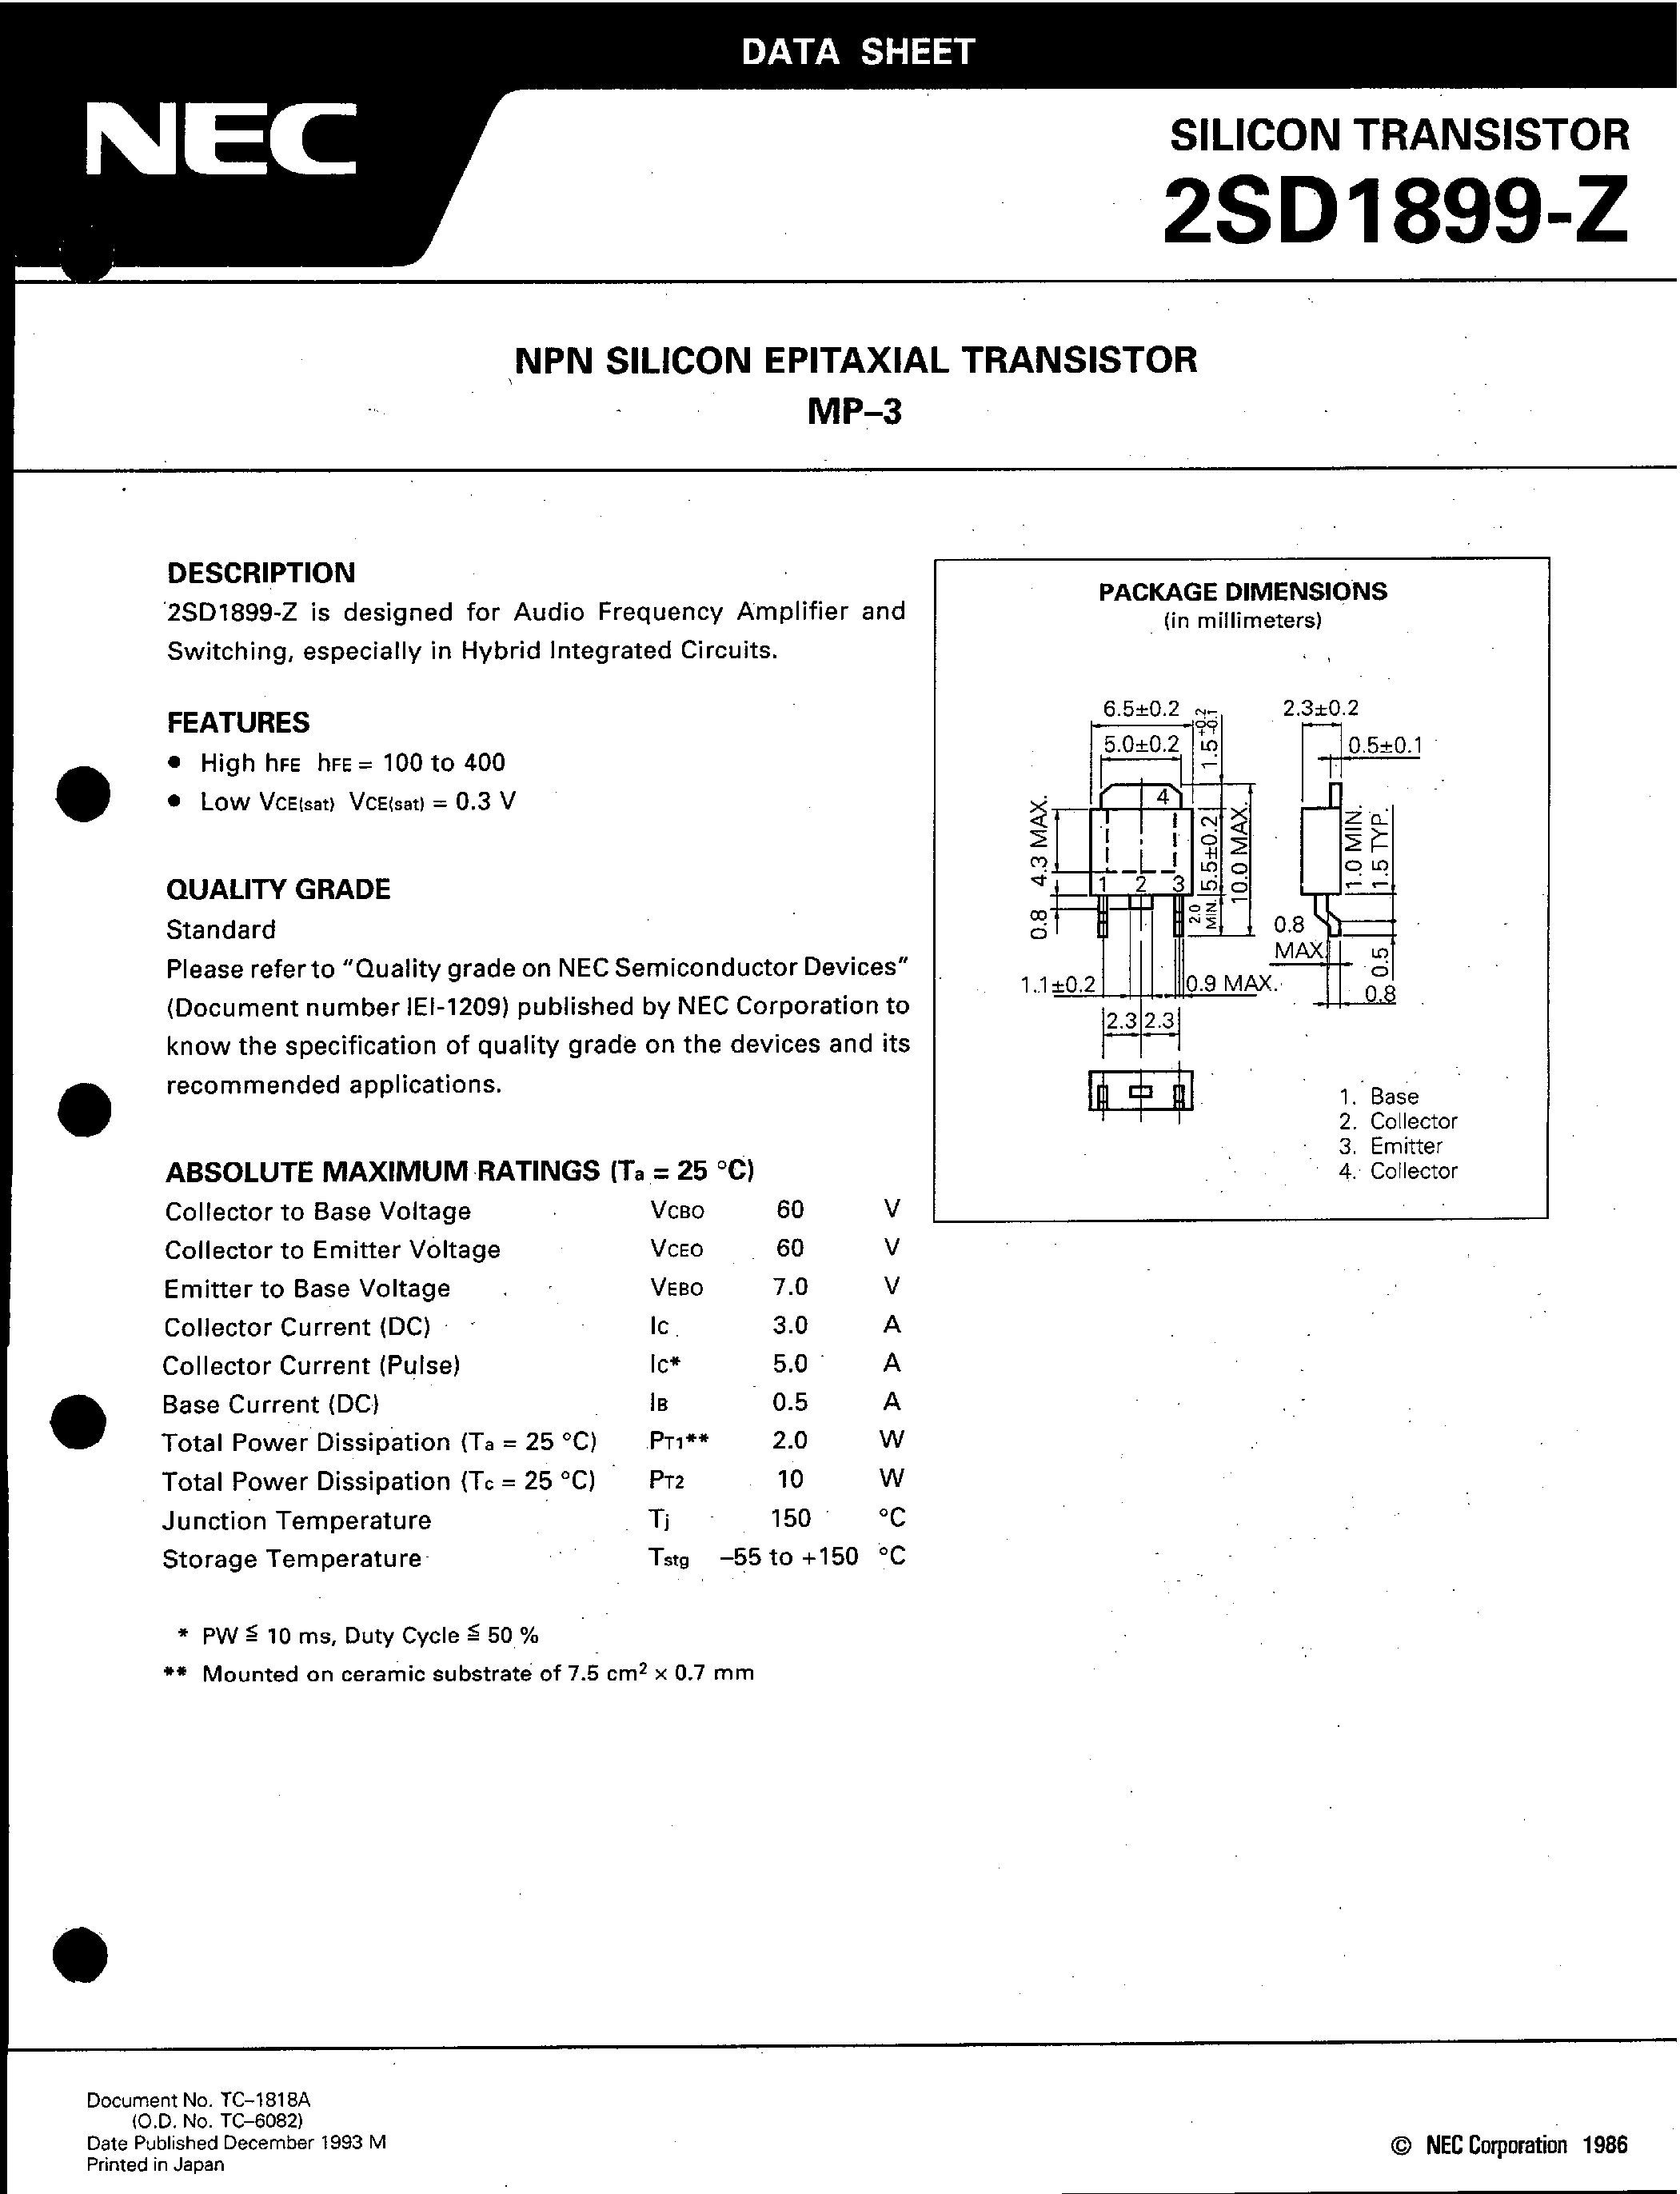 Даташит 2SD1899-Z - NPN SILICON EPITAXIAL TRANSISTOR MP-3 страница 1